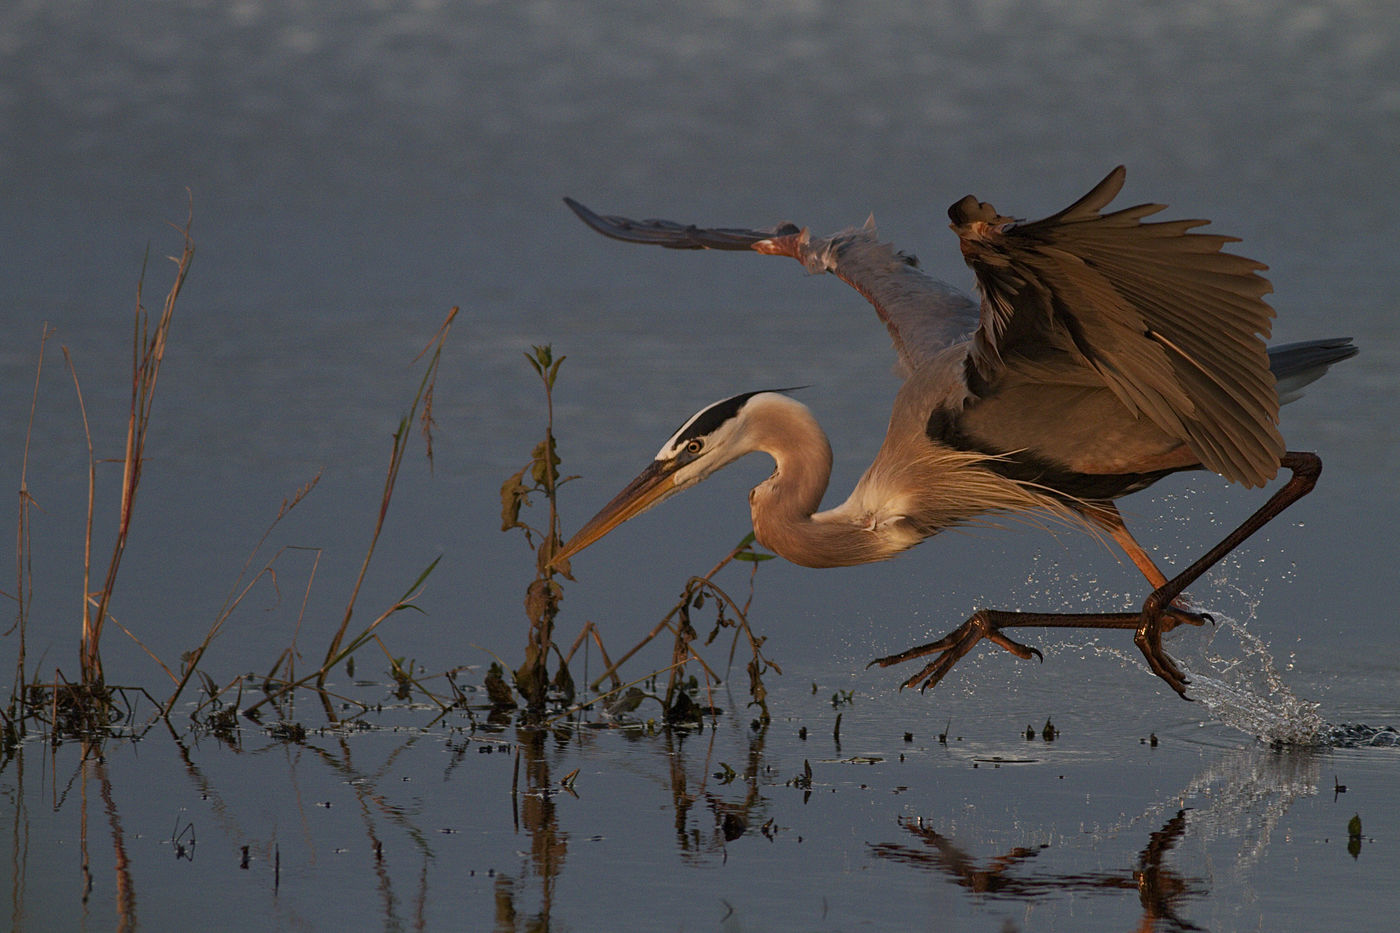 A large, long-necked bird with outspread wings, leaping over reflective water.